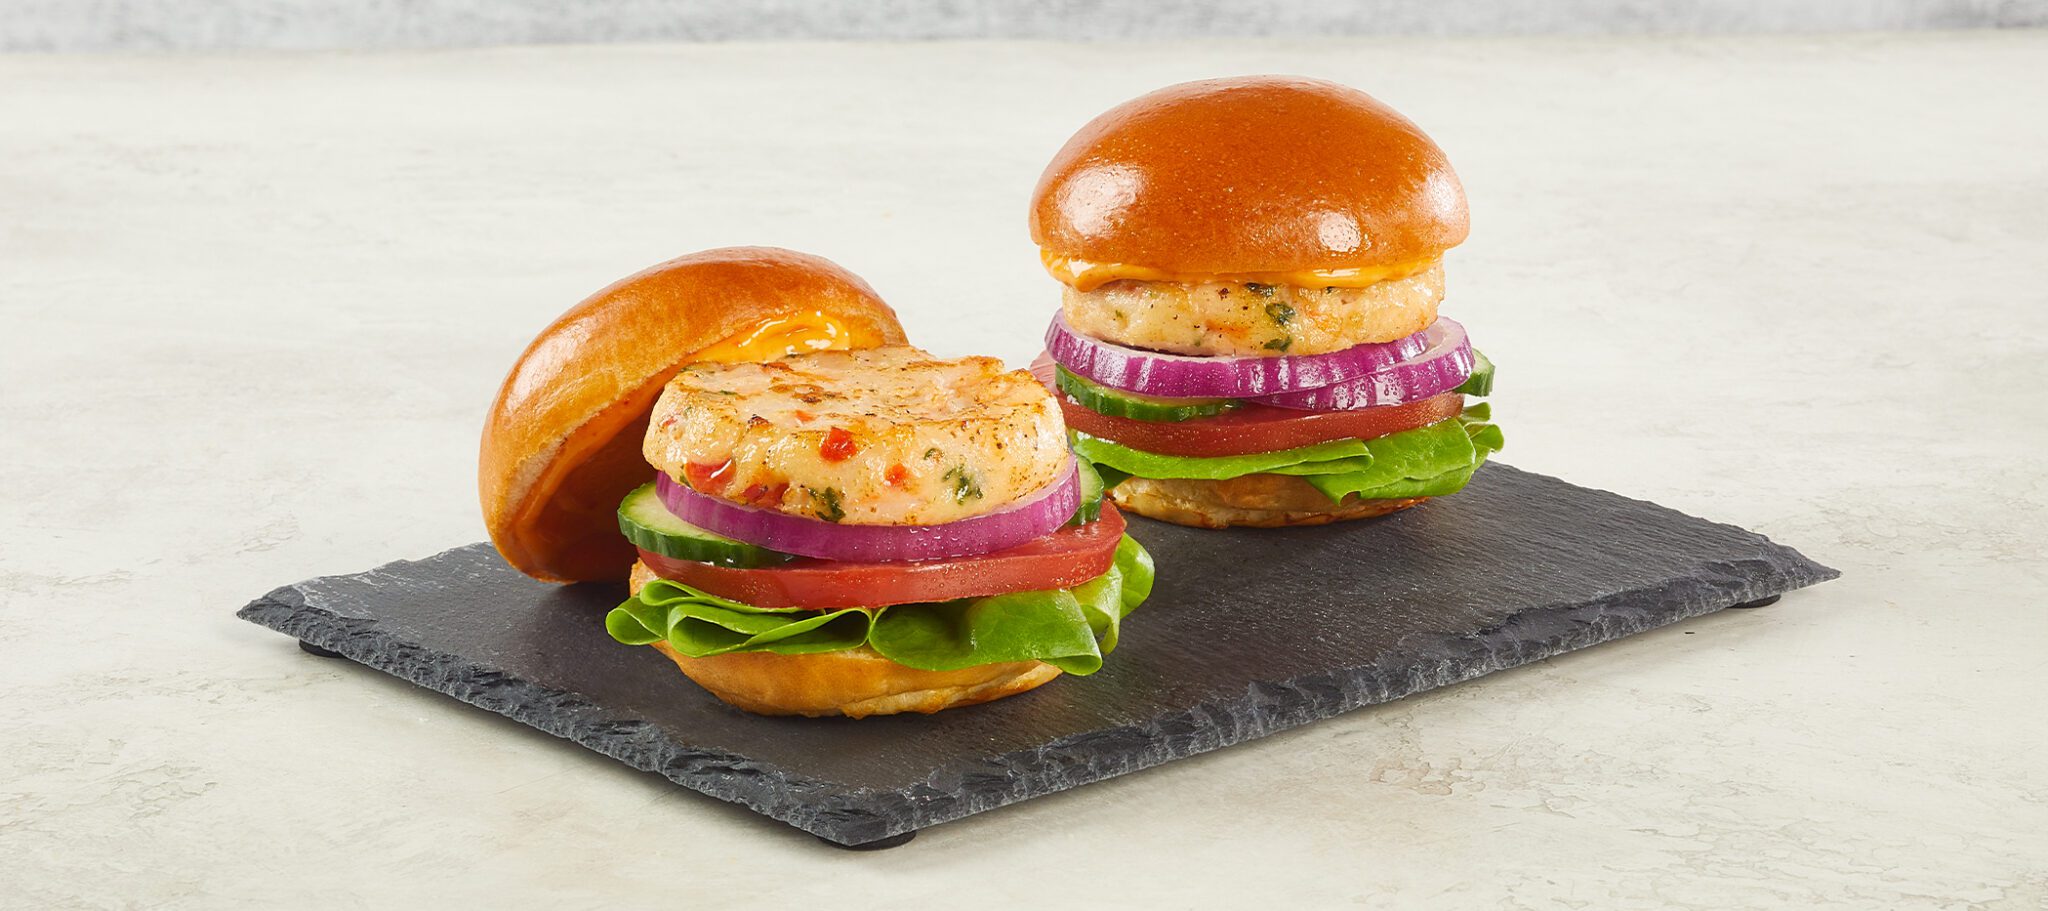 Two Social Kitchens Pro Premium Shrimp Sliders served on a slate slab on an off-white textured stone surface.